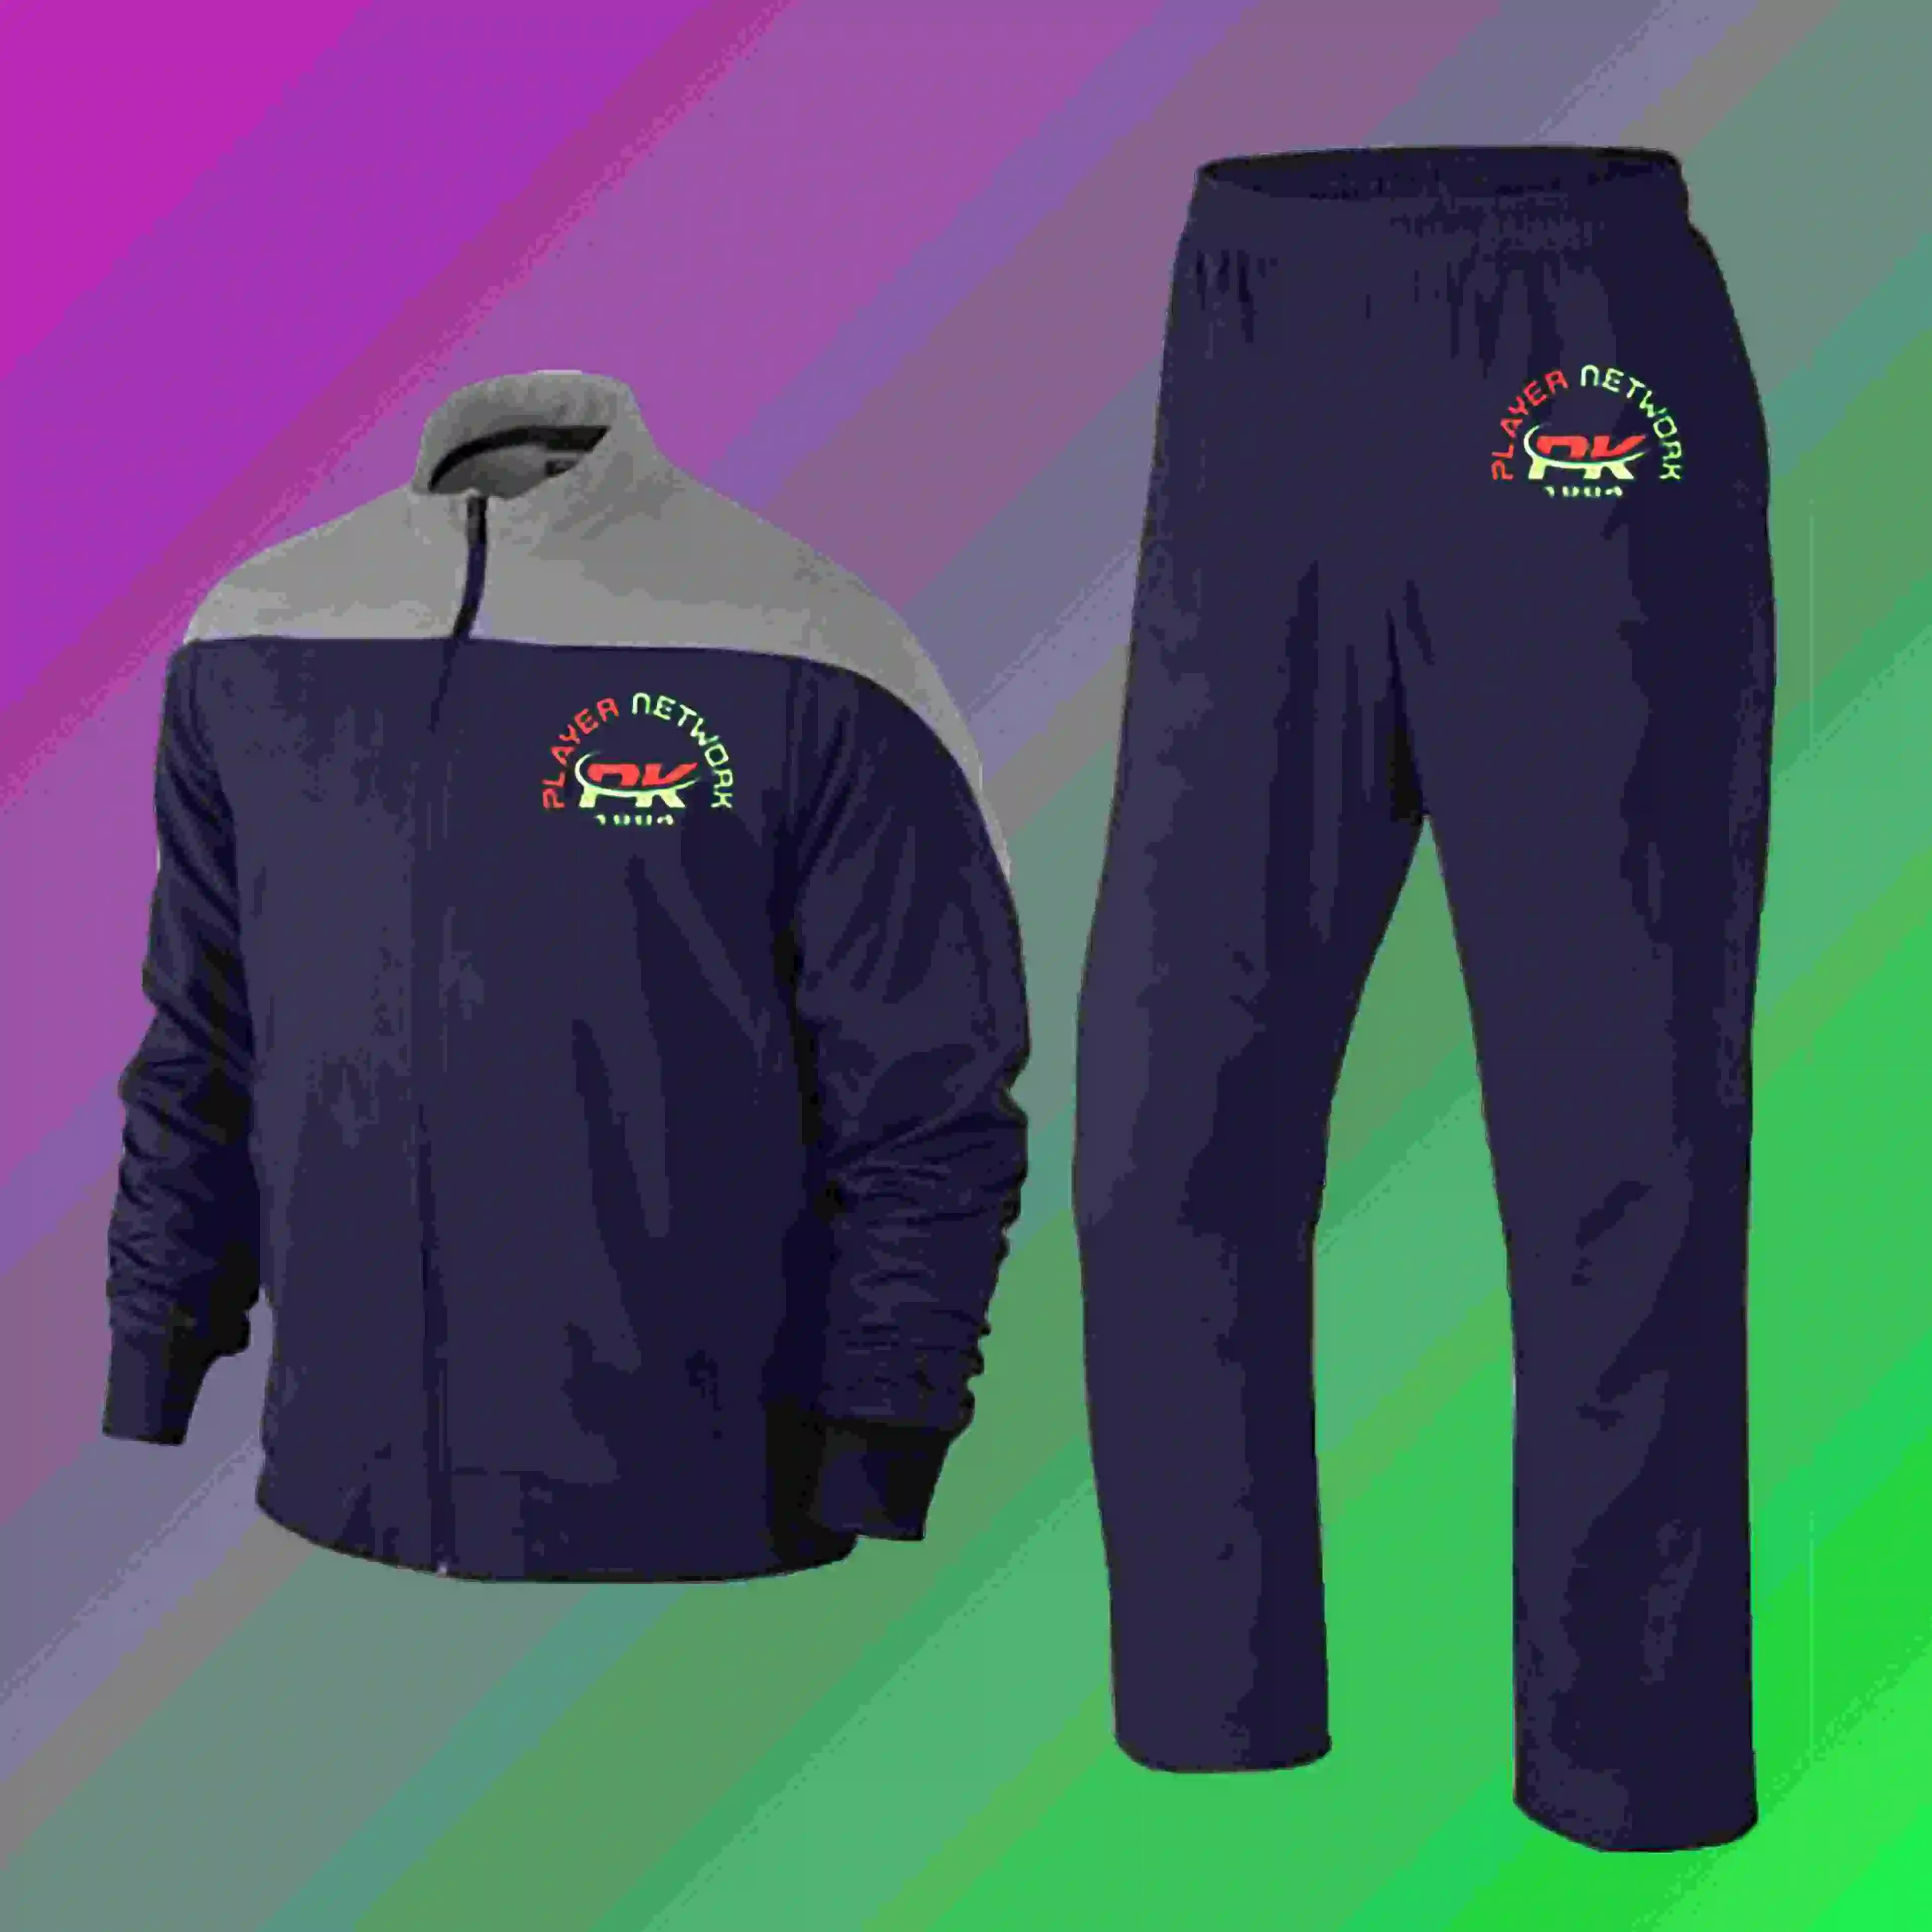 Tracksuit Best For All Types Of Sports,Unisex,Many Types Of Fabric ...